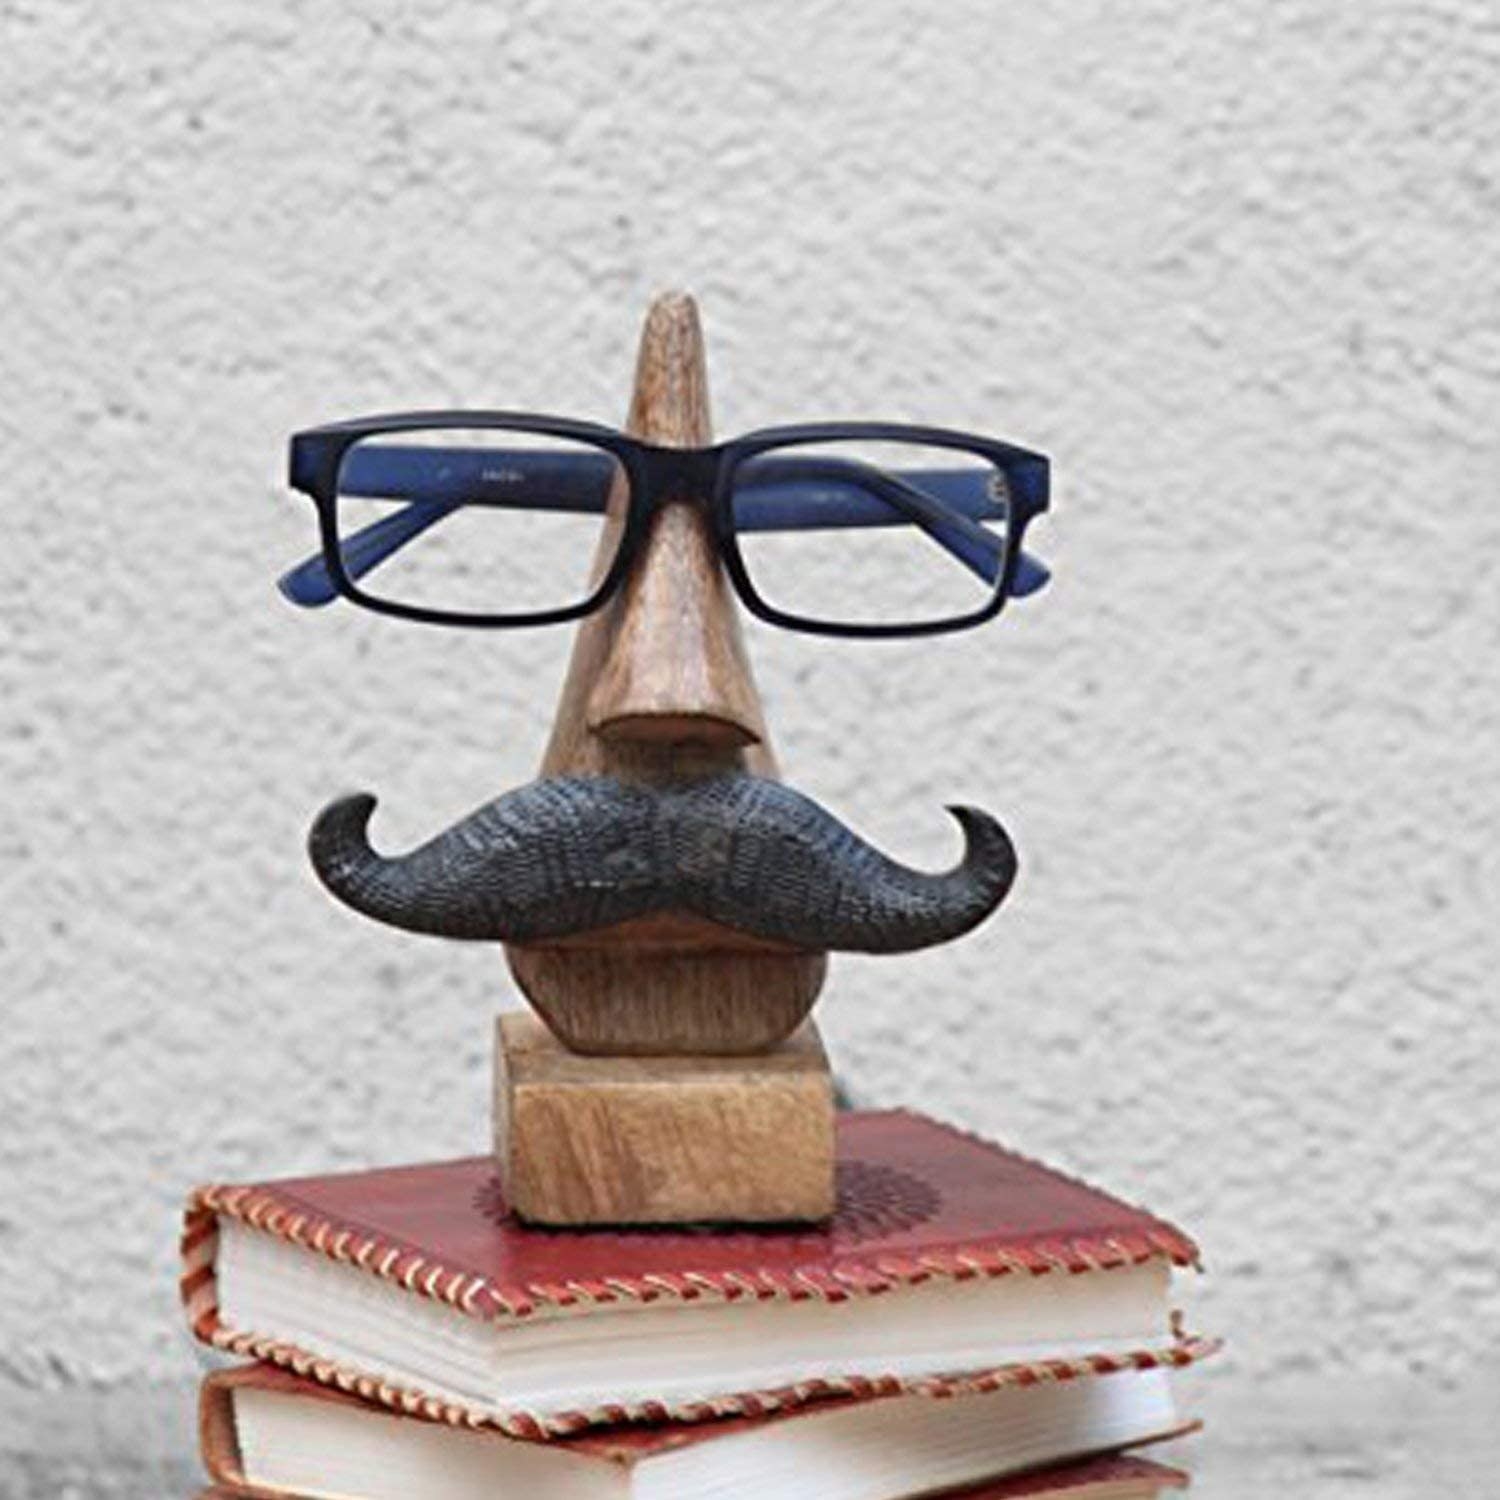 the glasses holder sitting on a stack of books